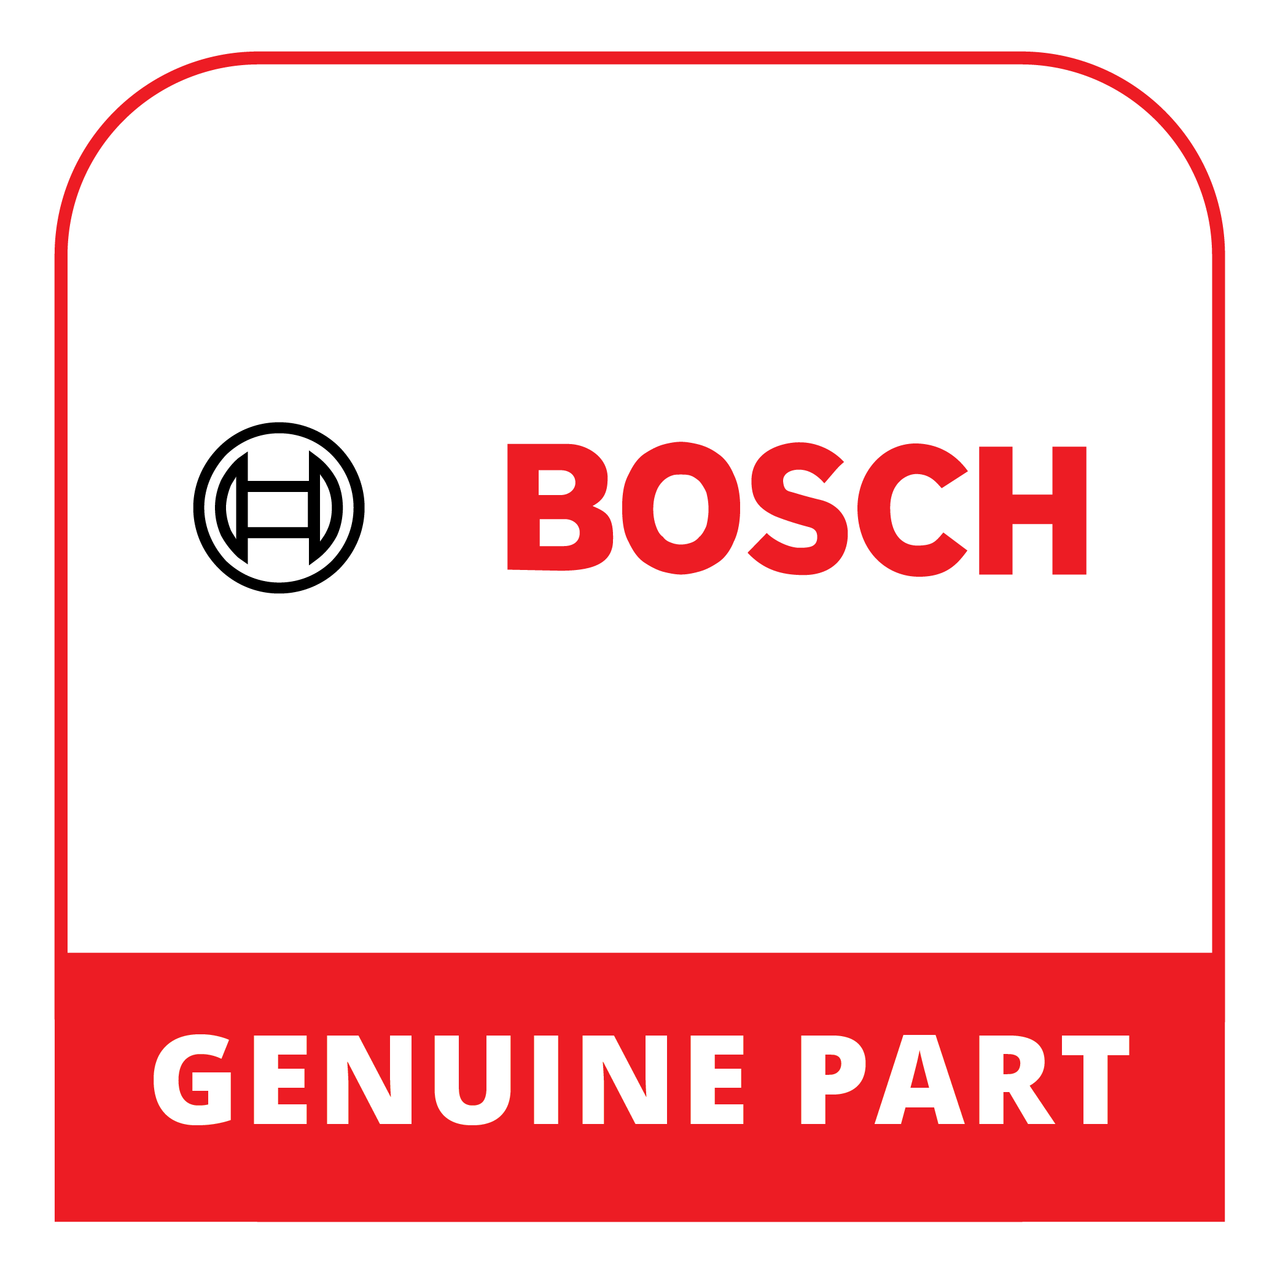 Bosch (Thermador) 00312430 - Accessories-/ Cleaner Set - Genuine Bosch (Thermador) Part